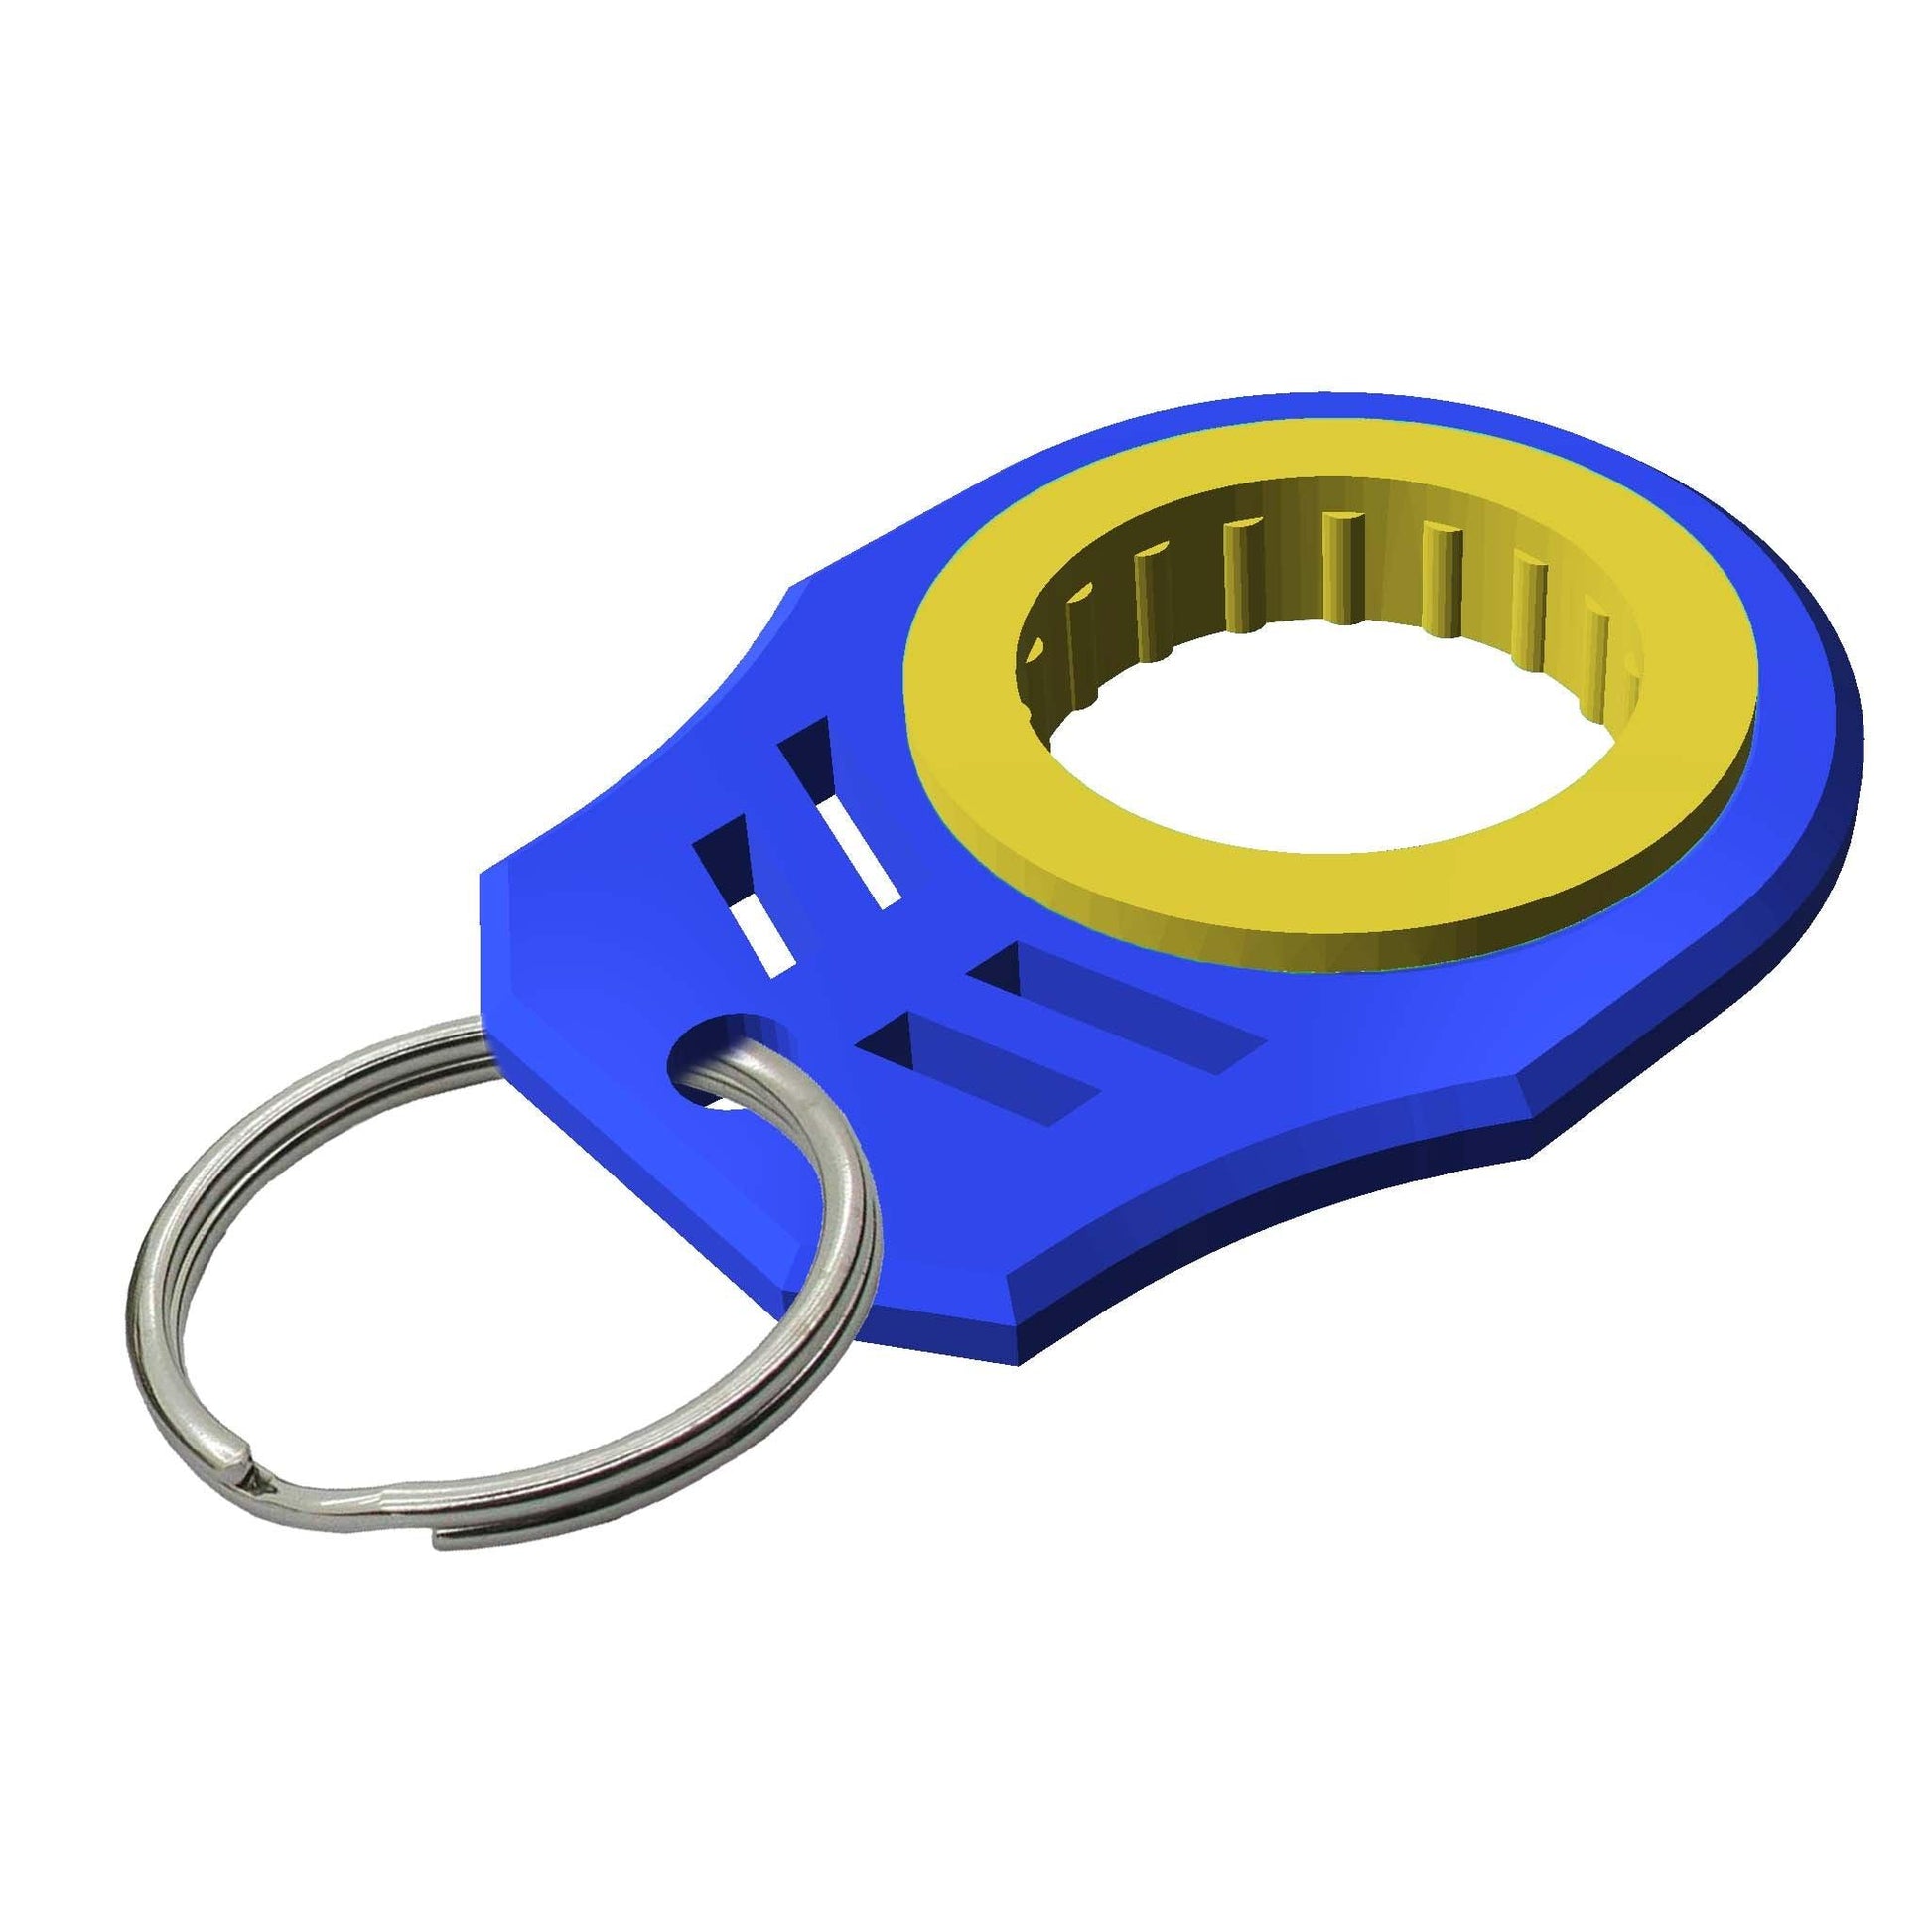 Eye-catching Spinner Key Chain Accessory